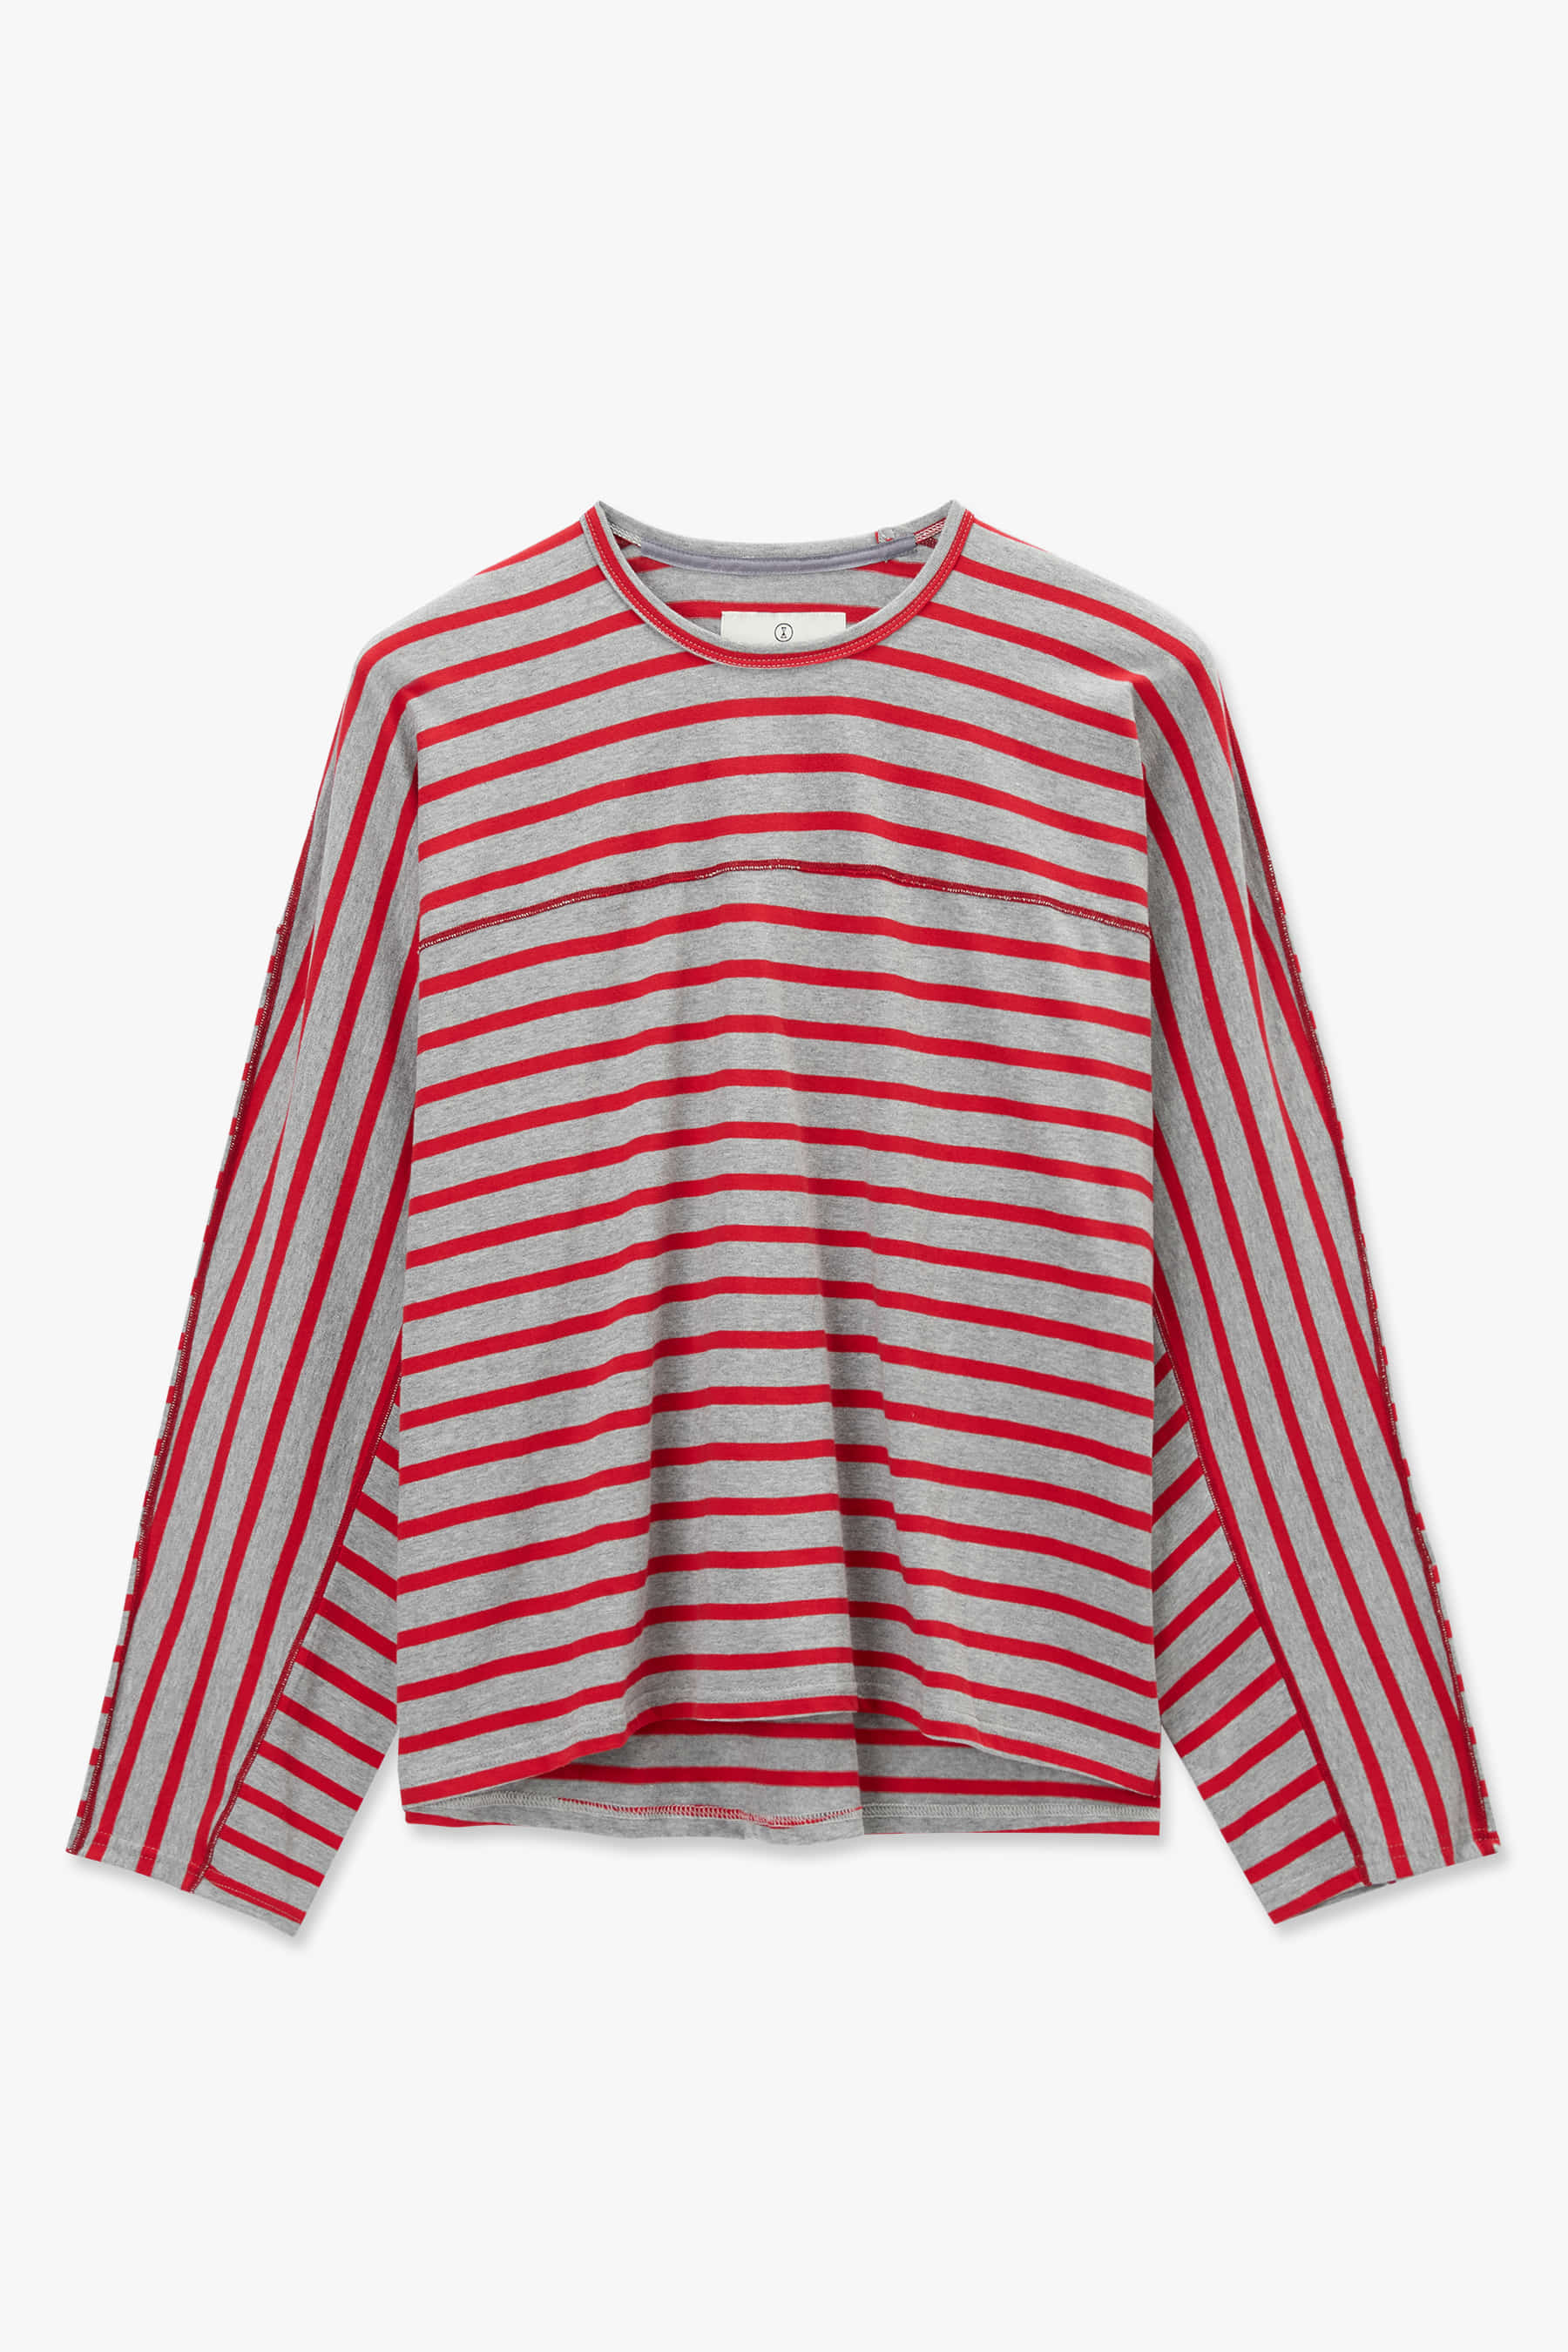 GREY/RED OVERSIZED COTTON BASQUE SHIRTS